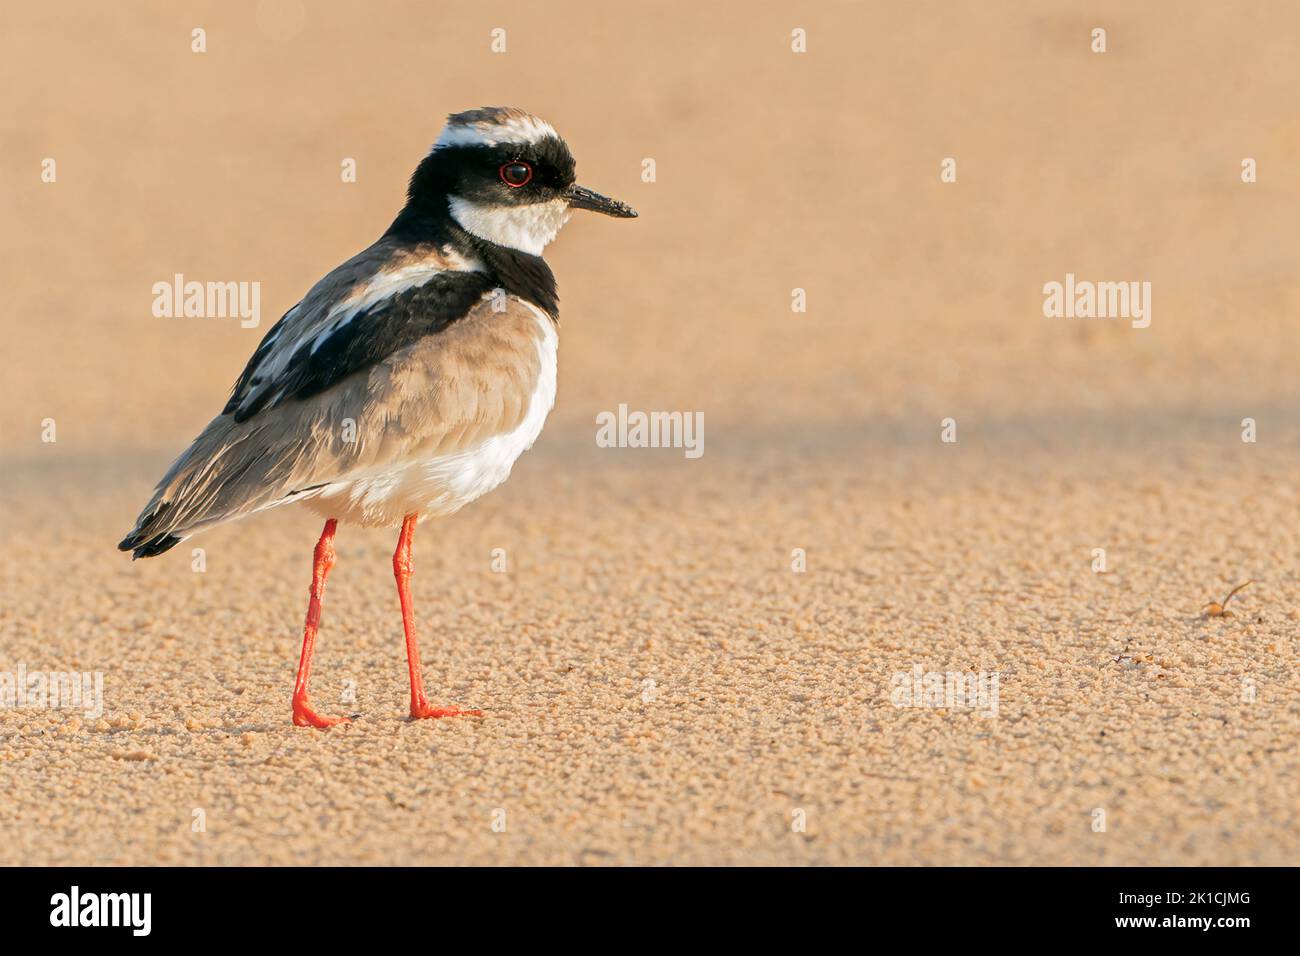 pied lapwing or pied plover, Vanellus cayanus, single adult standing on sandy beach, Pantanal, Brazil Stock Photo